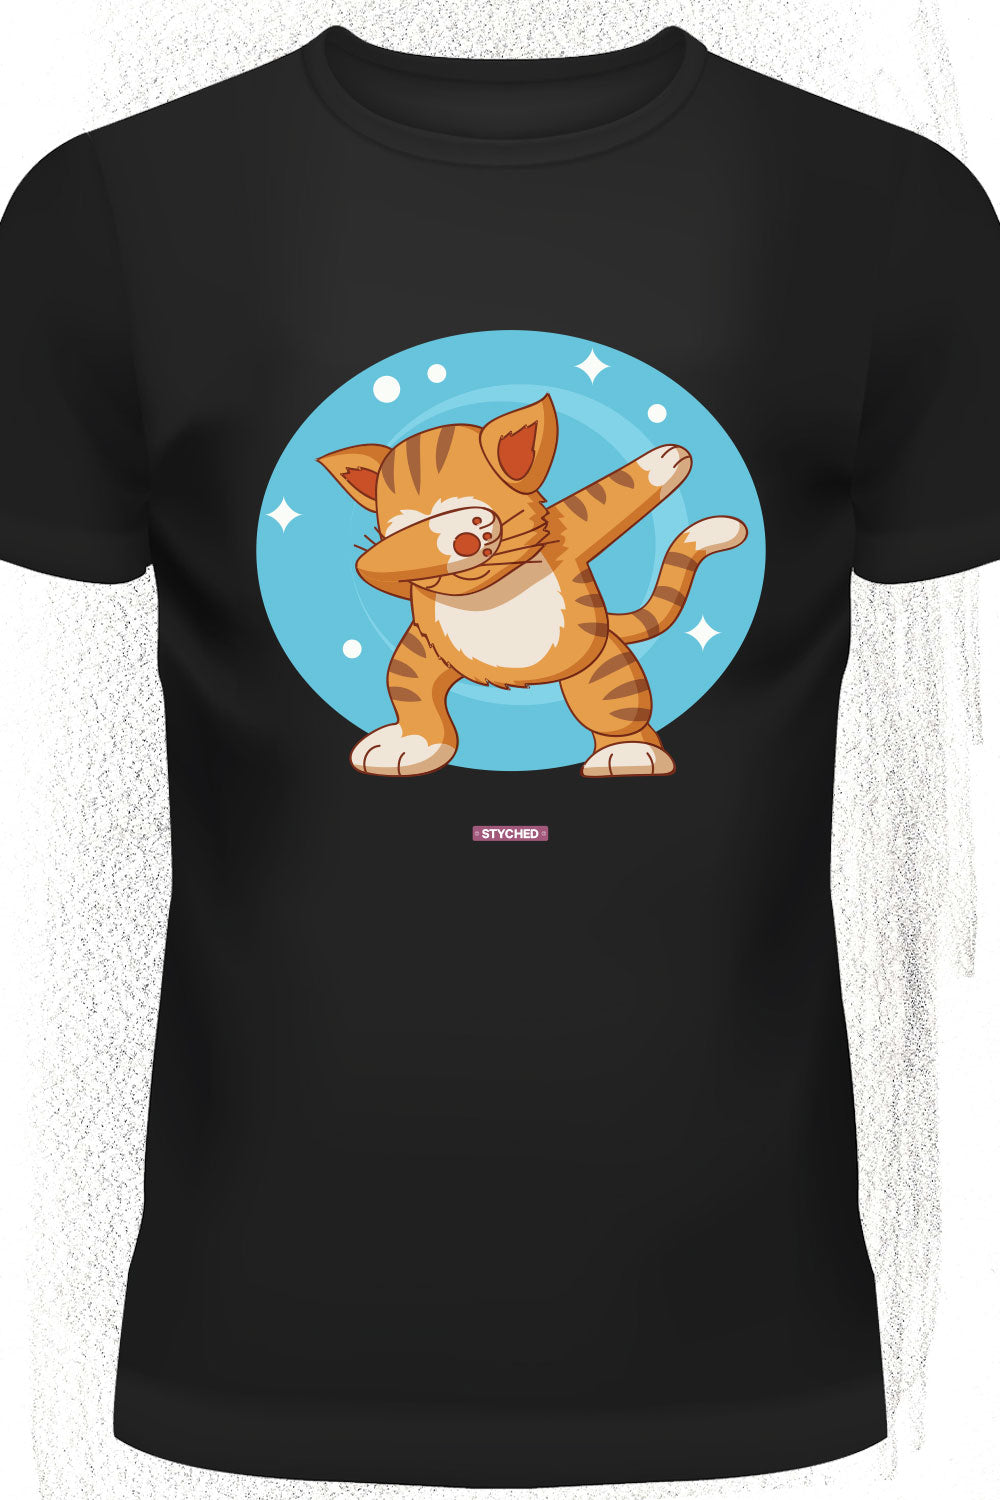 Cat showing off Dab Dance moves - Quirky Graphic T-Shirt Black Color